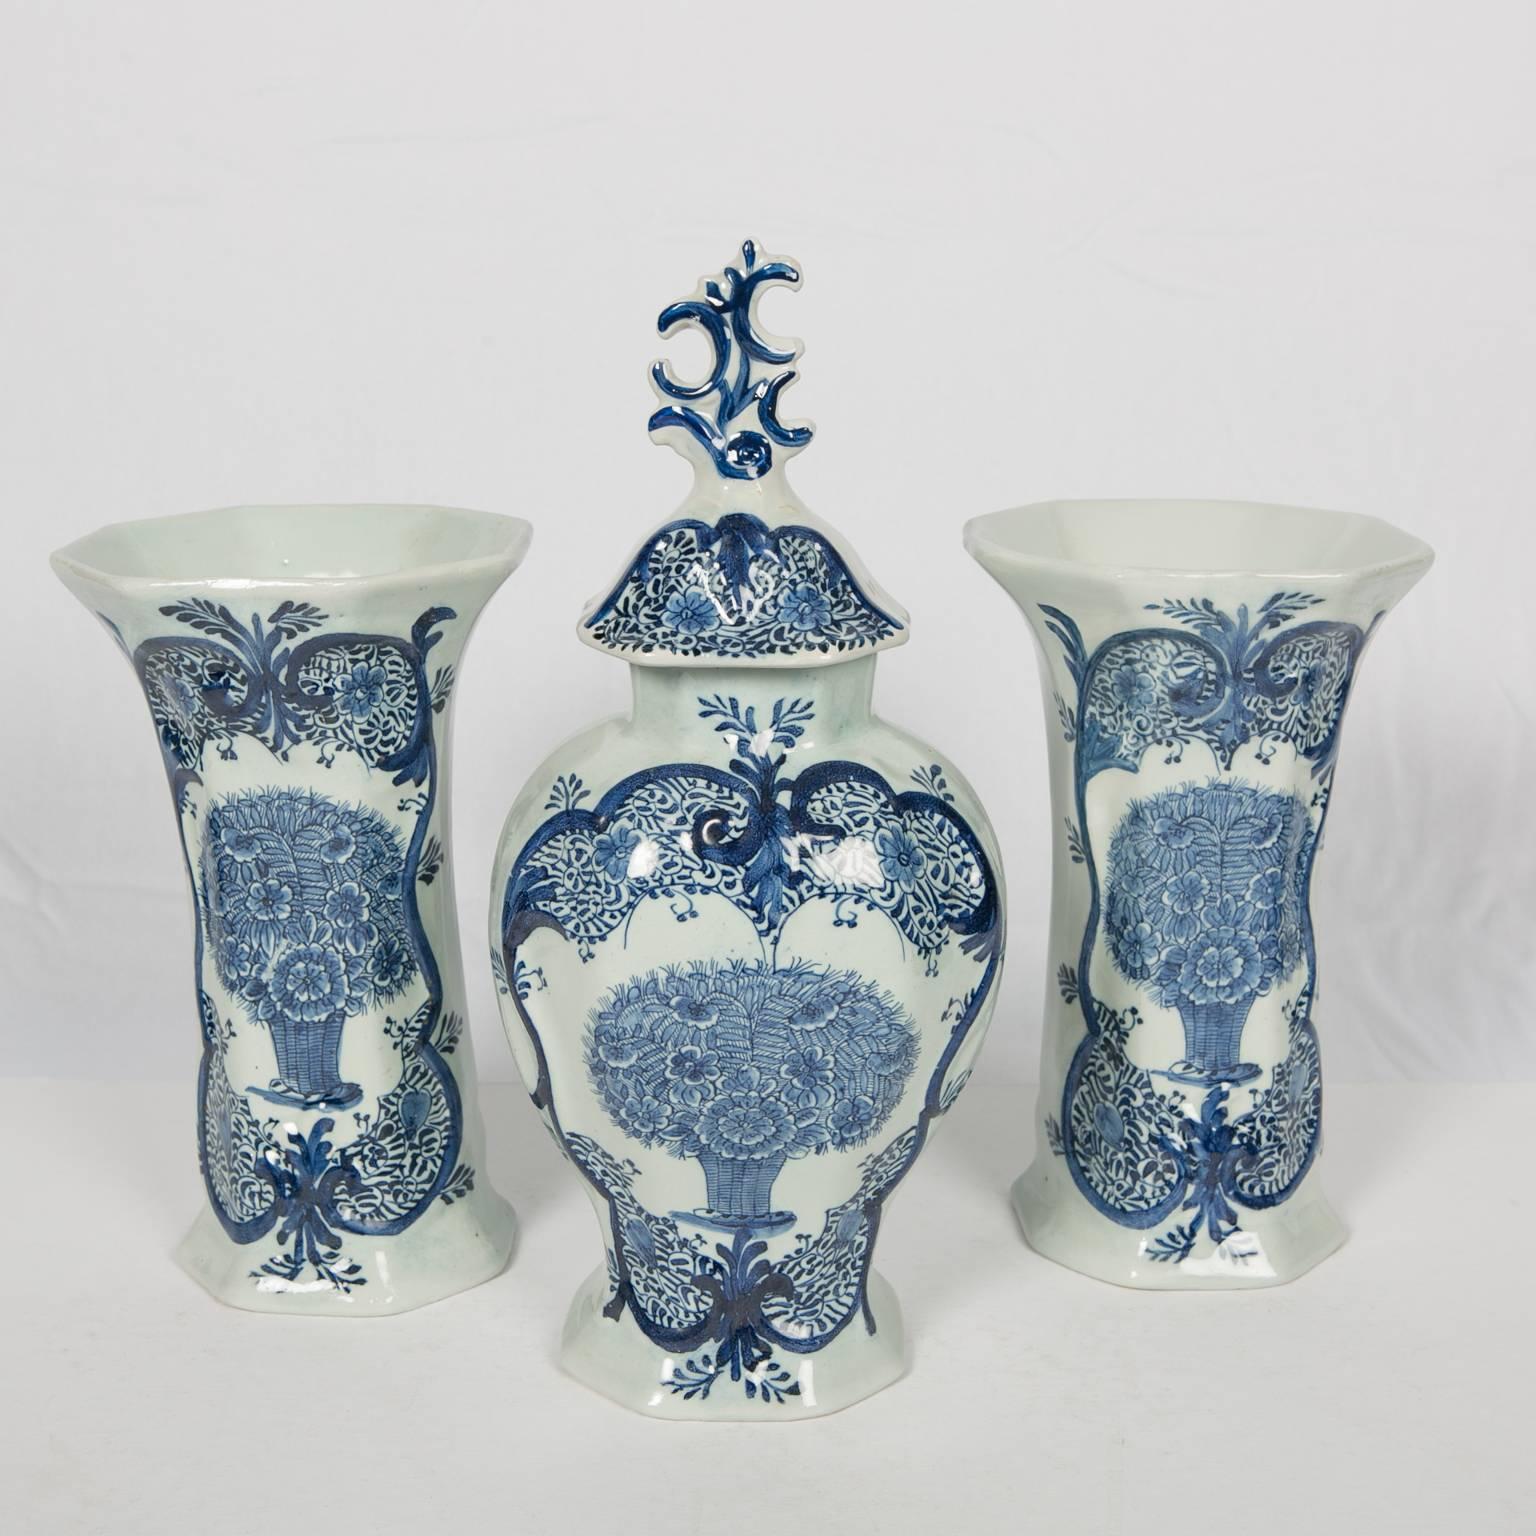 Provenance: For an image of a very similar set of four pieces and a discussion of its origins, see: E B Schaap 